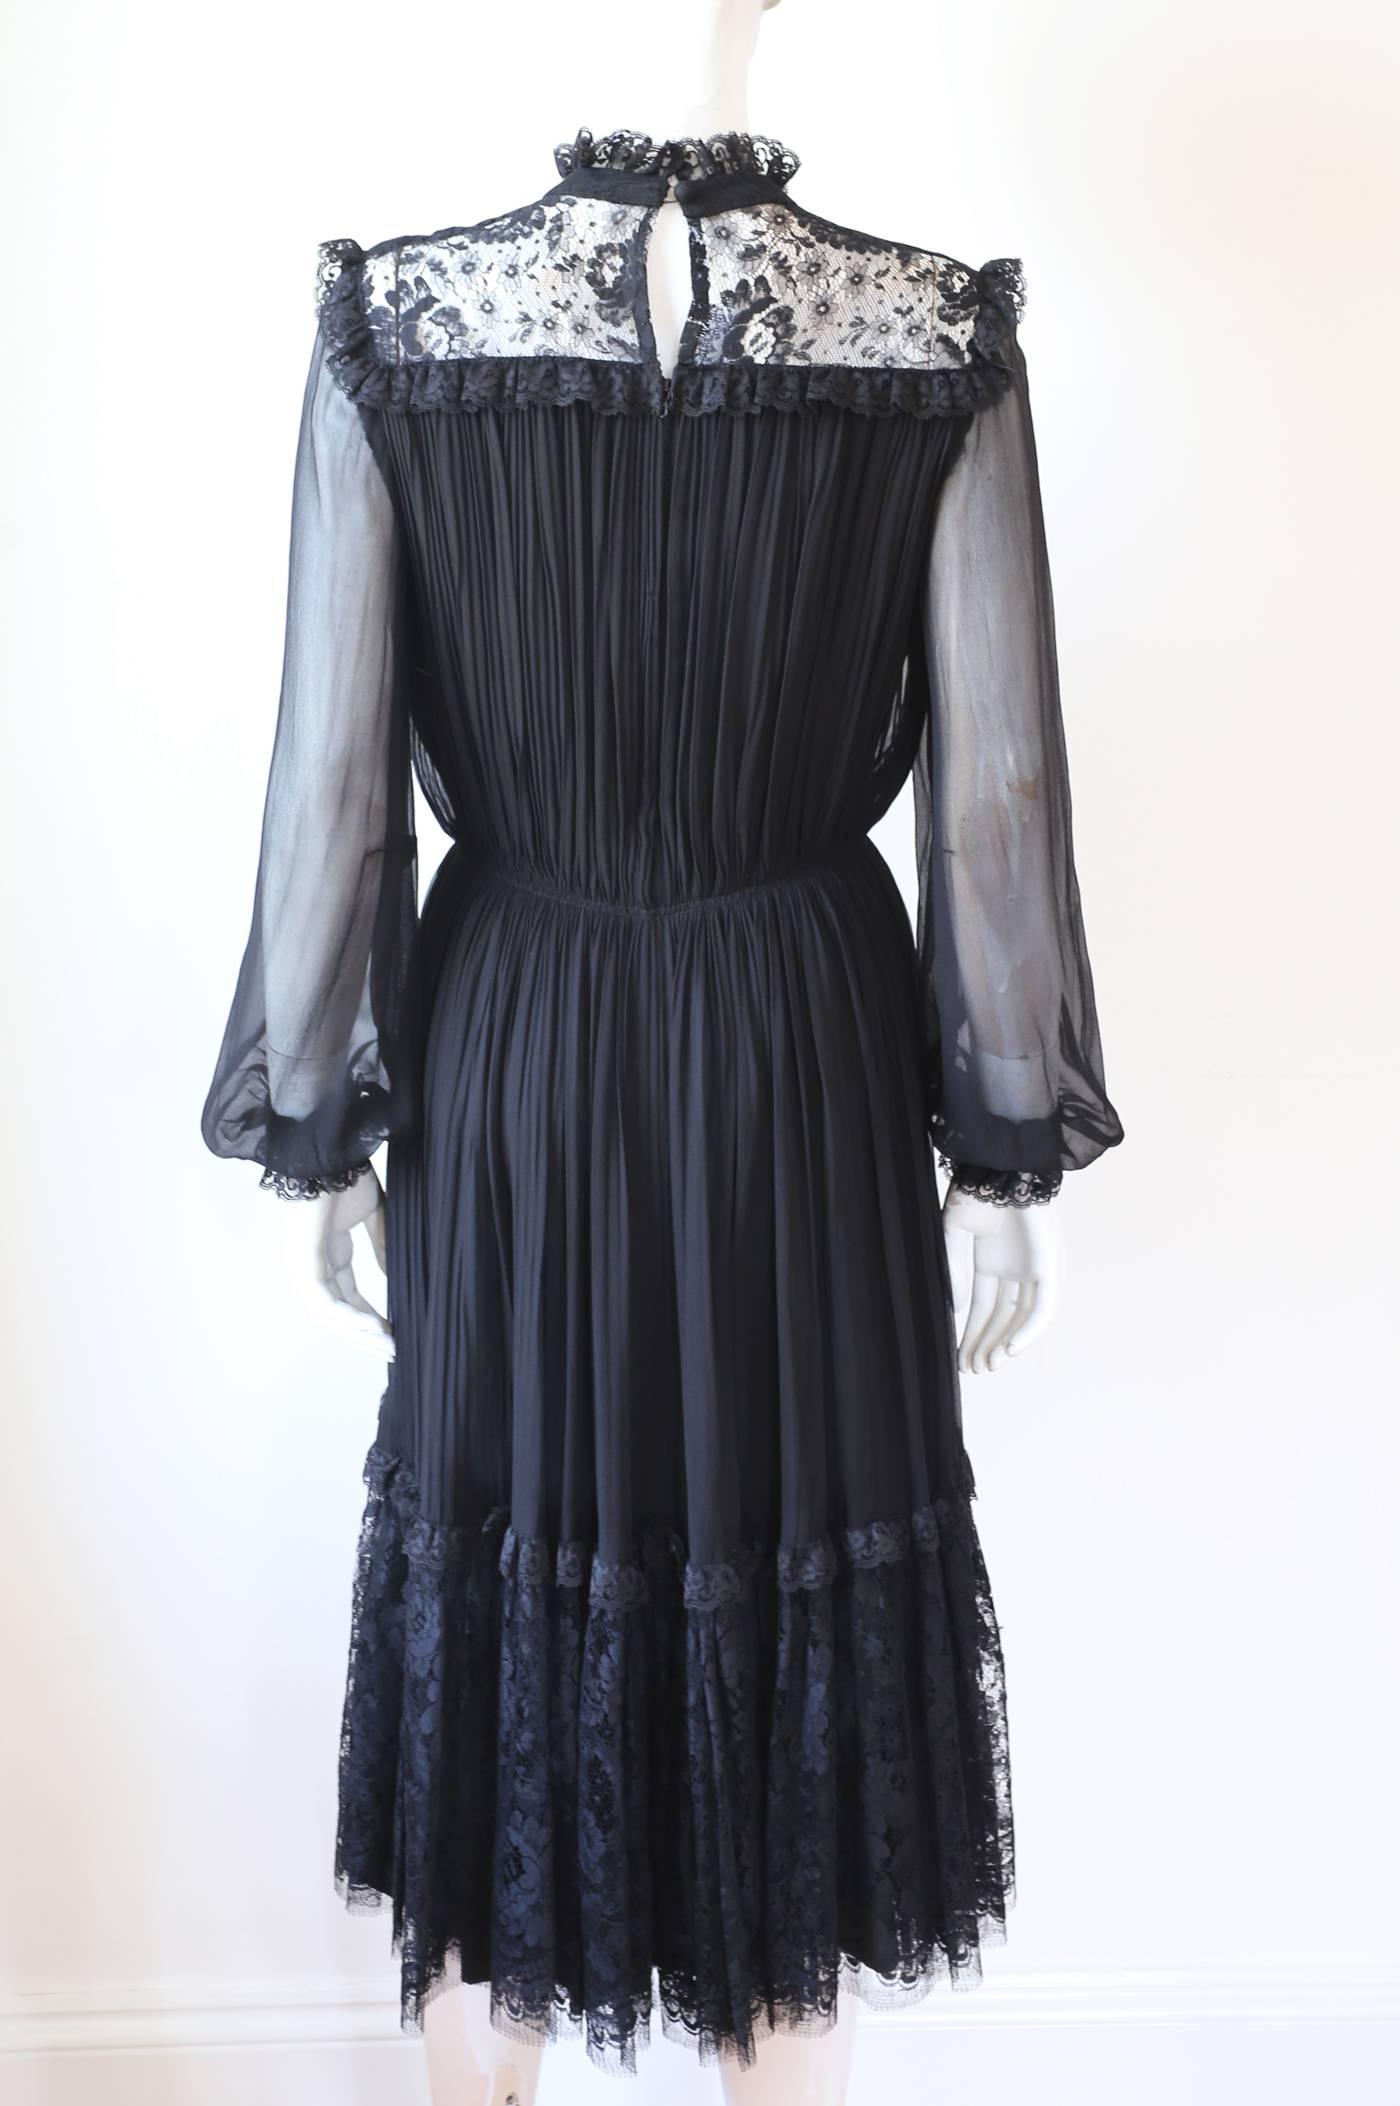 Women's Hardy Amies pleated evening dress with lace, c. 1970s